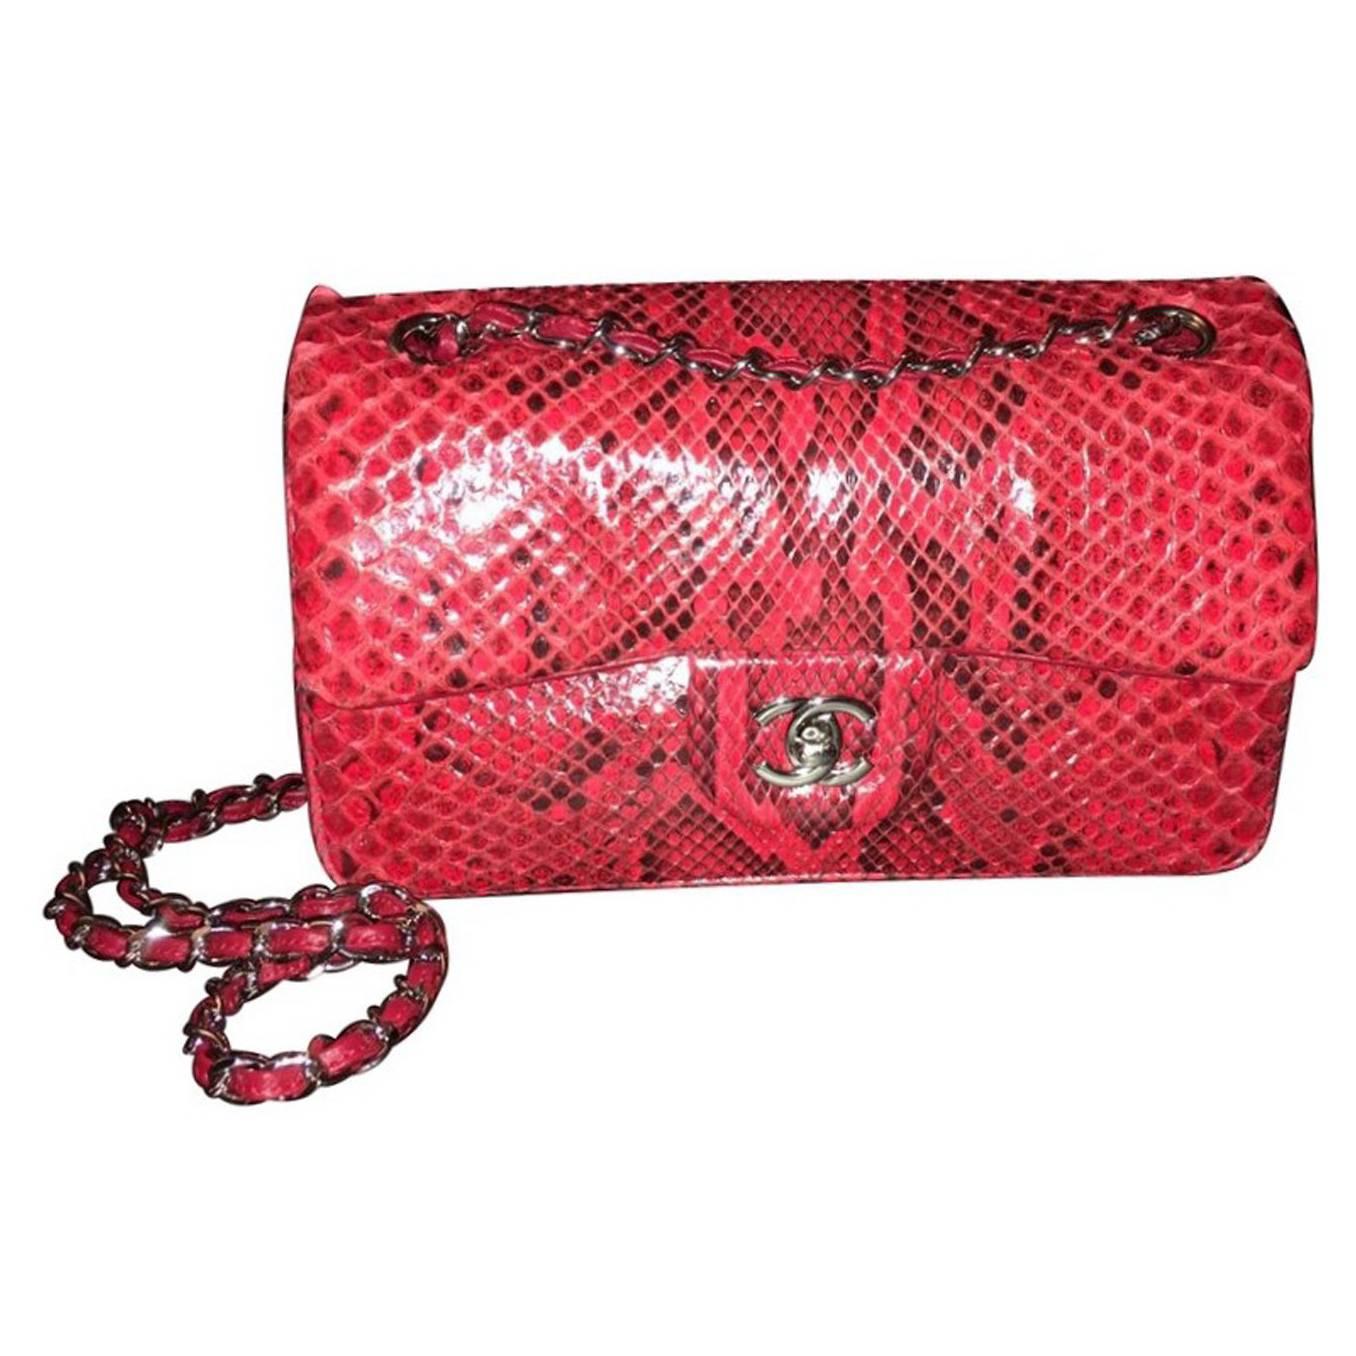 2014 Chanel 2.55 Rare Red Python Skin Limited Edition